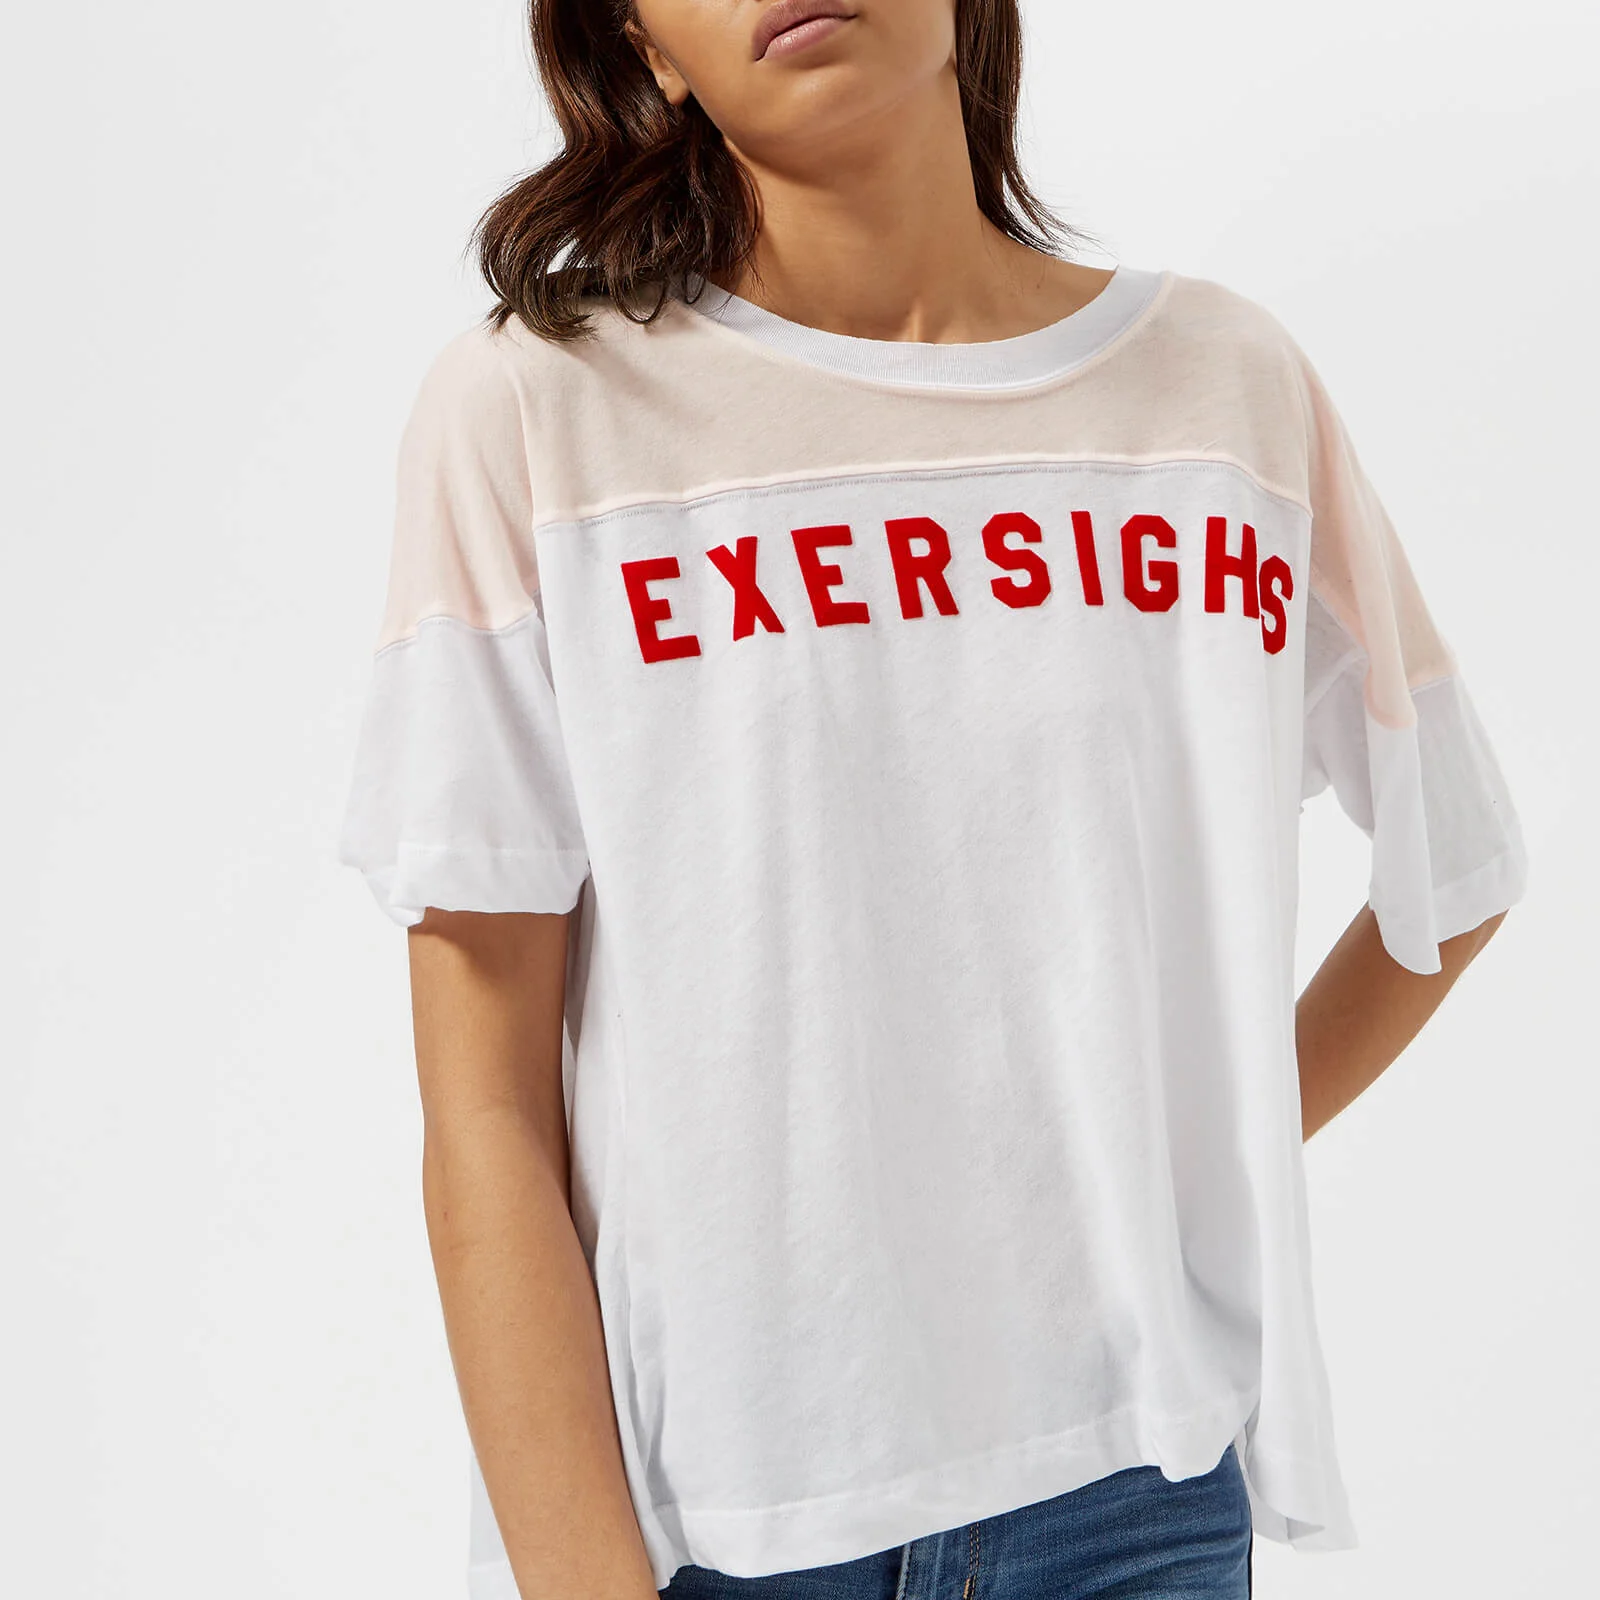 Wildfox Women's Exersighs Short Sleeve T-Shirt - Clean White Image 1